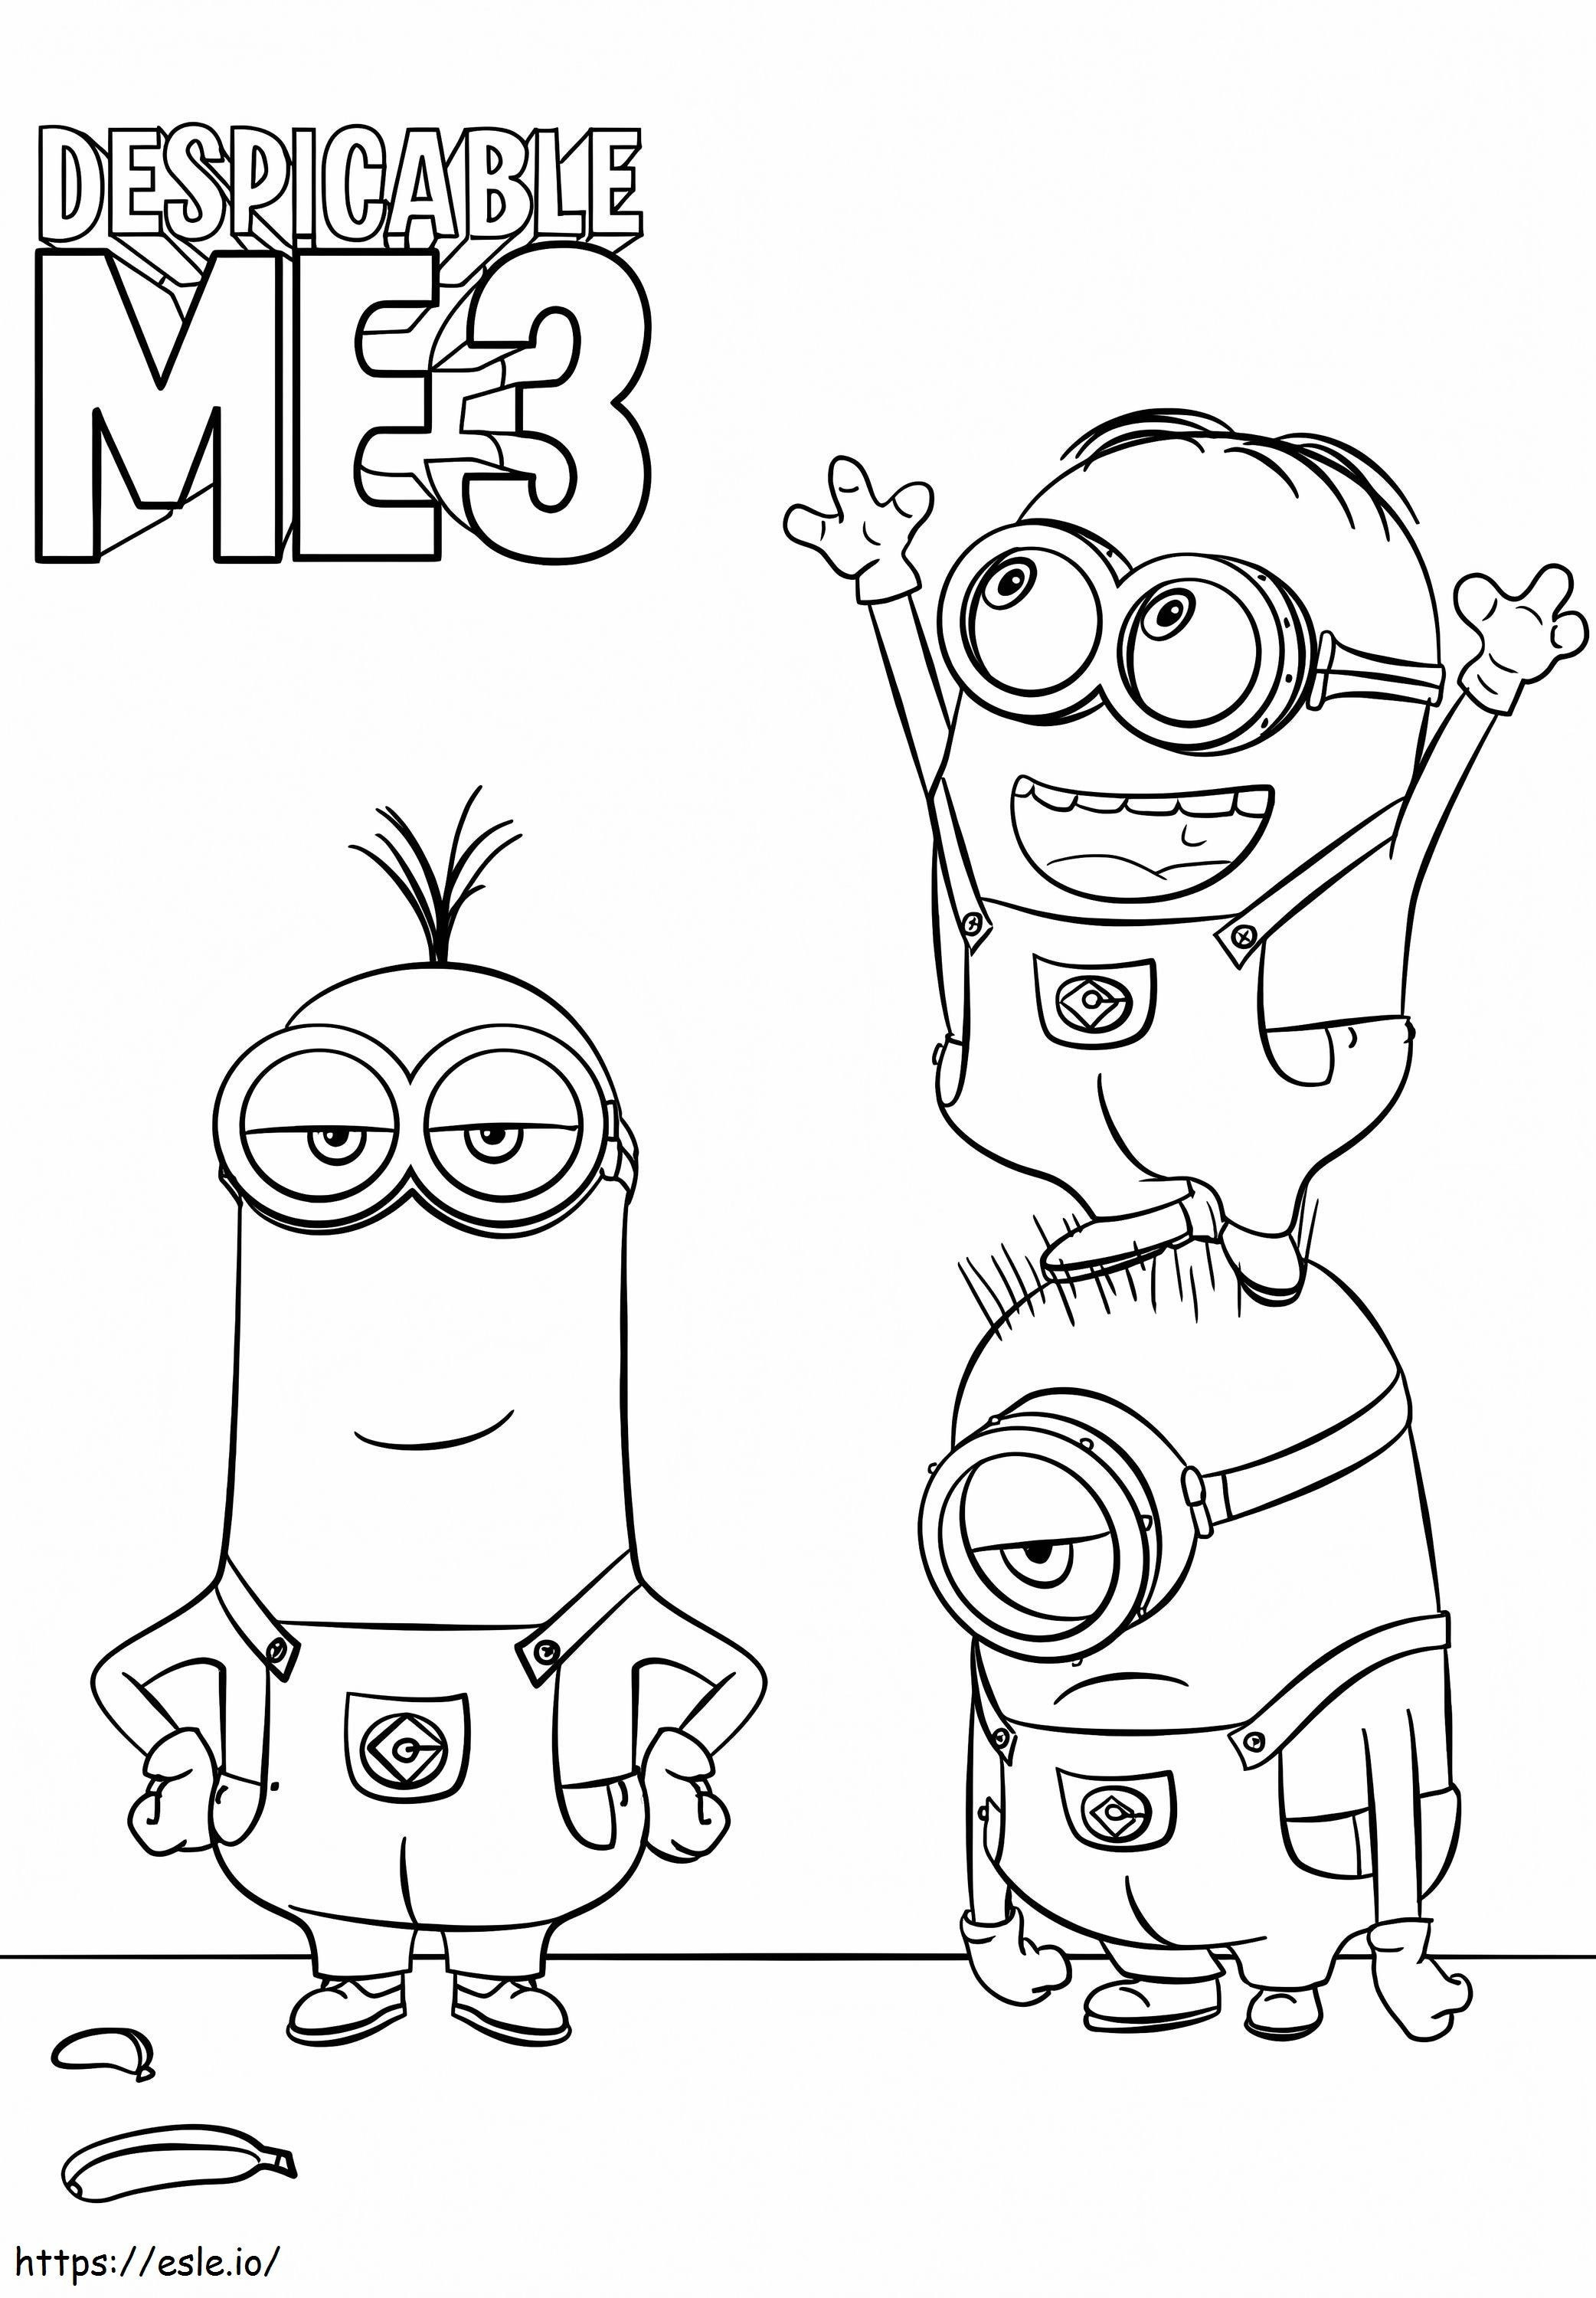 Minions From Despicable Me 3 coloring page